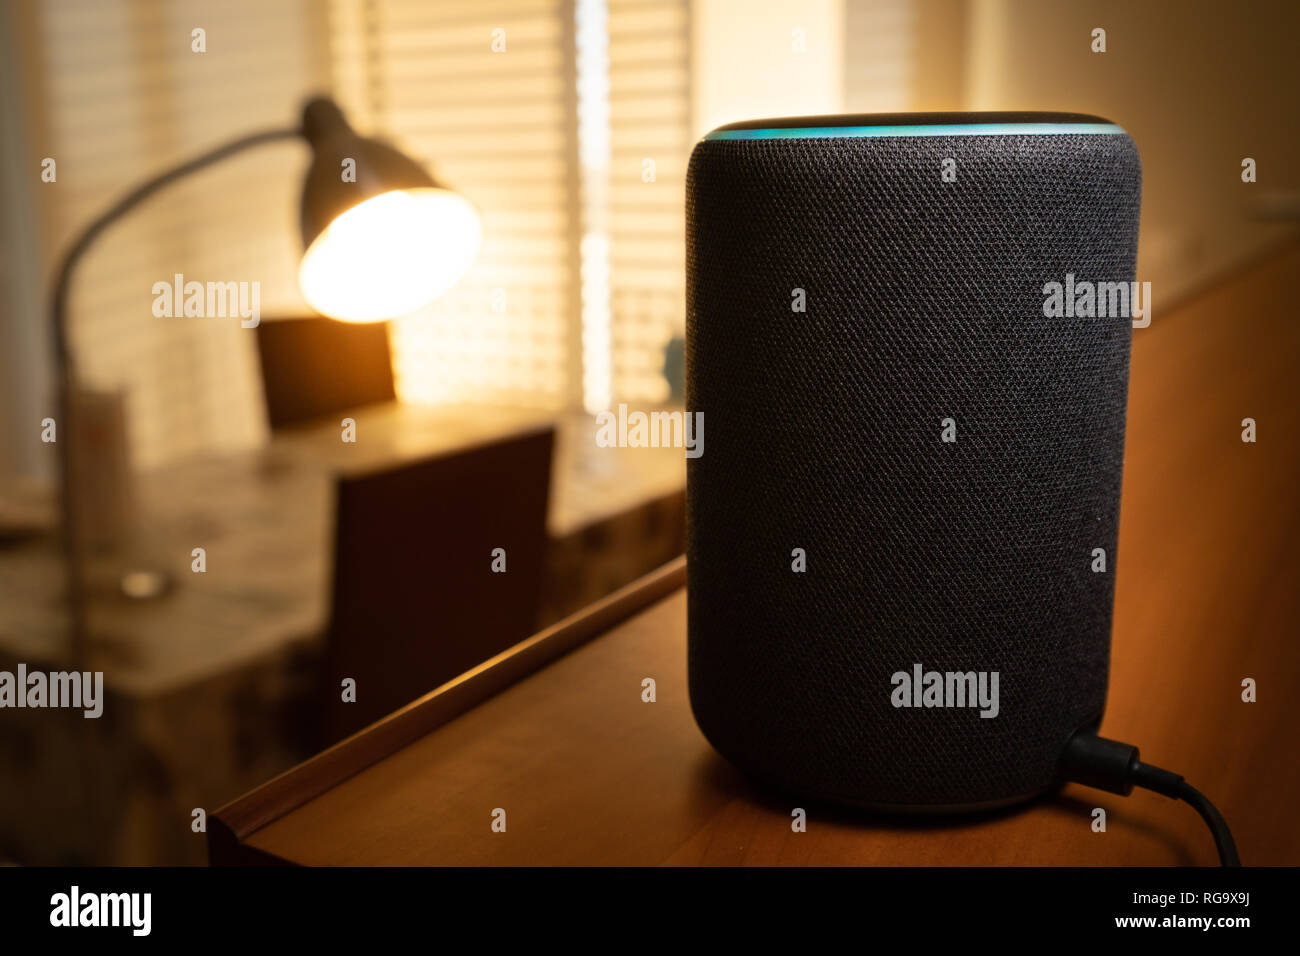 Barcelona, Spain. January 2019: Selective focus on Amazon Echo Plus smart Home device turning on a floor lamp Stock Photo